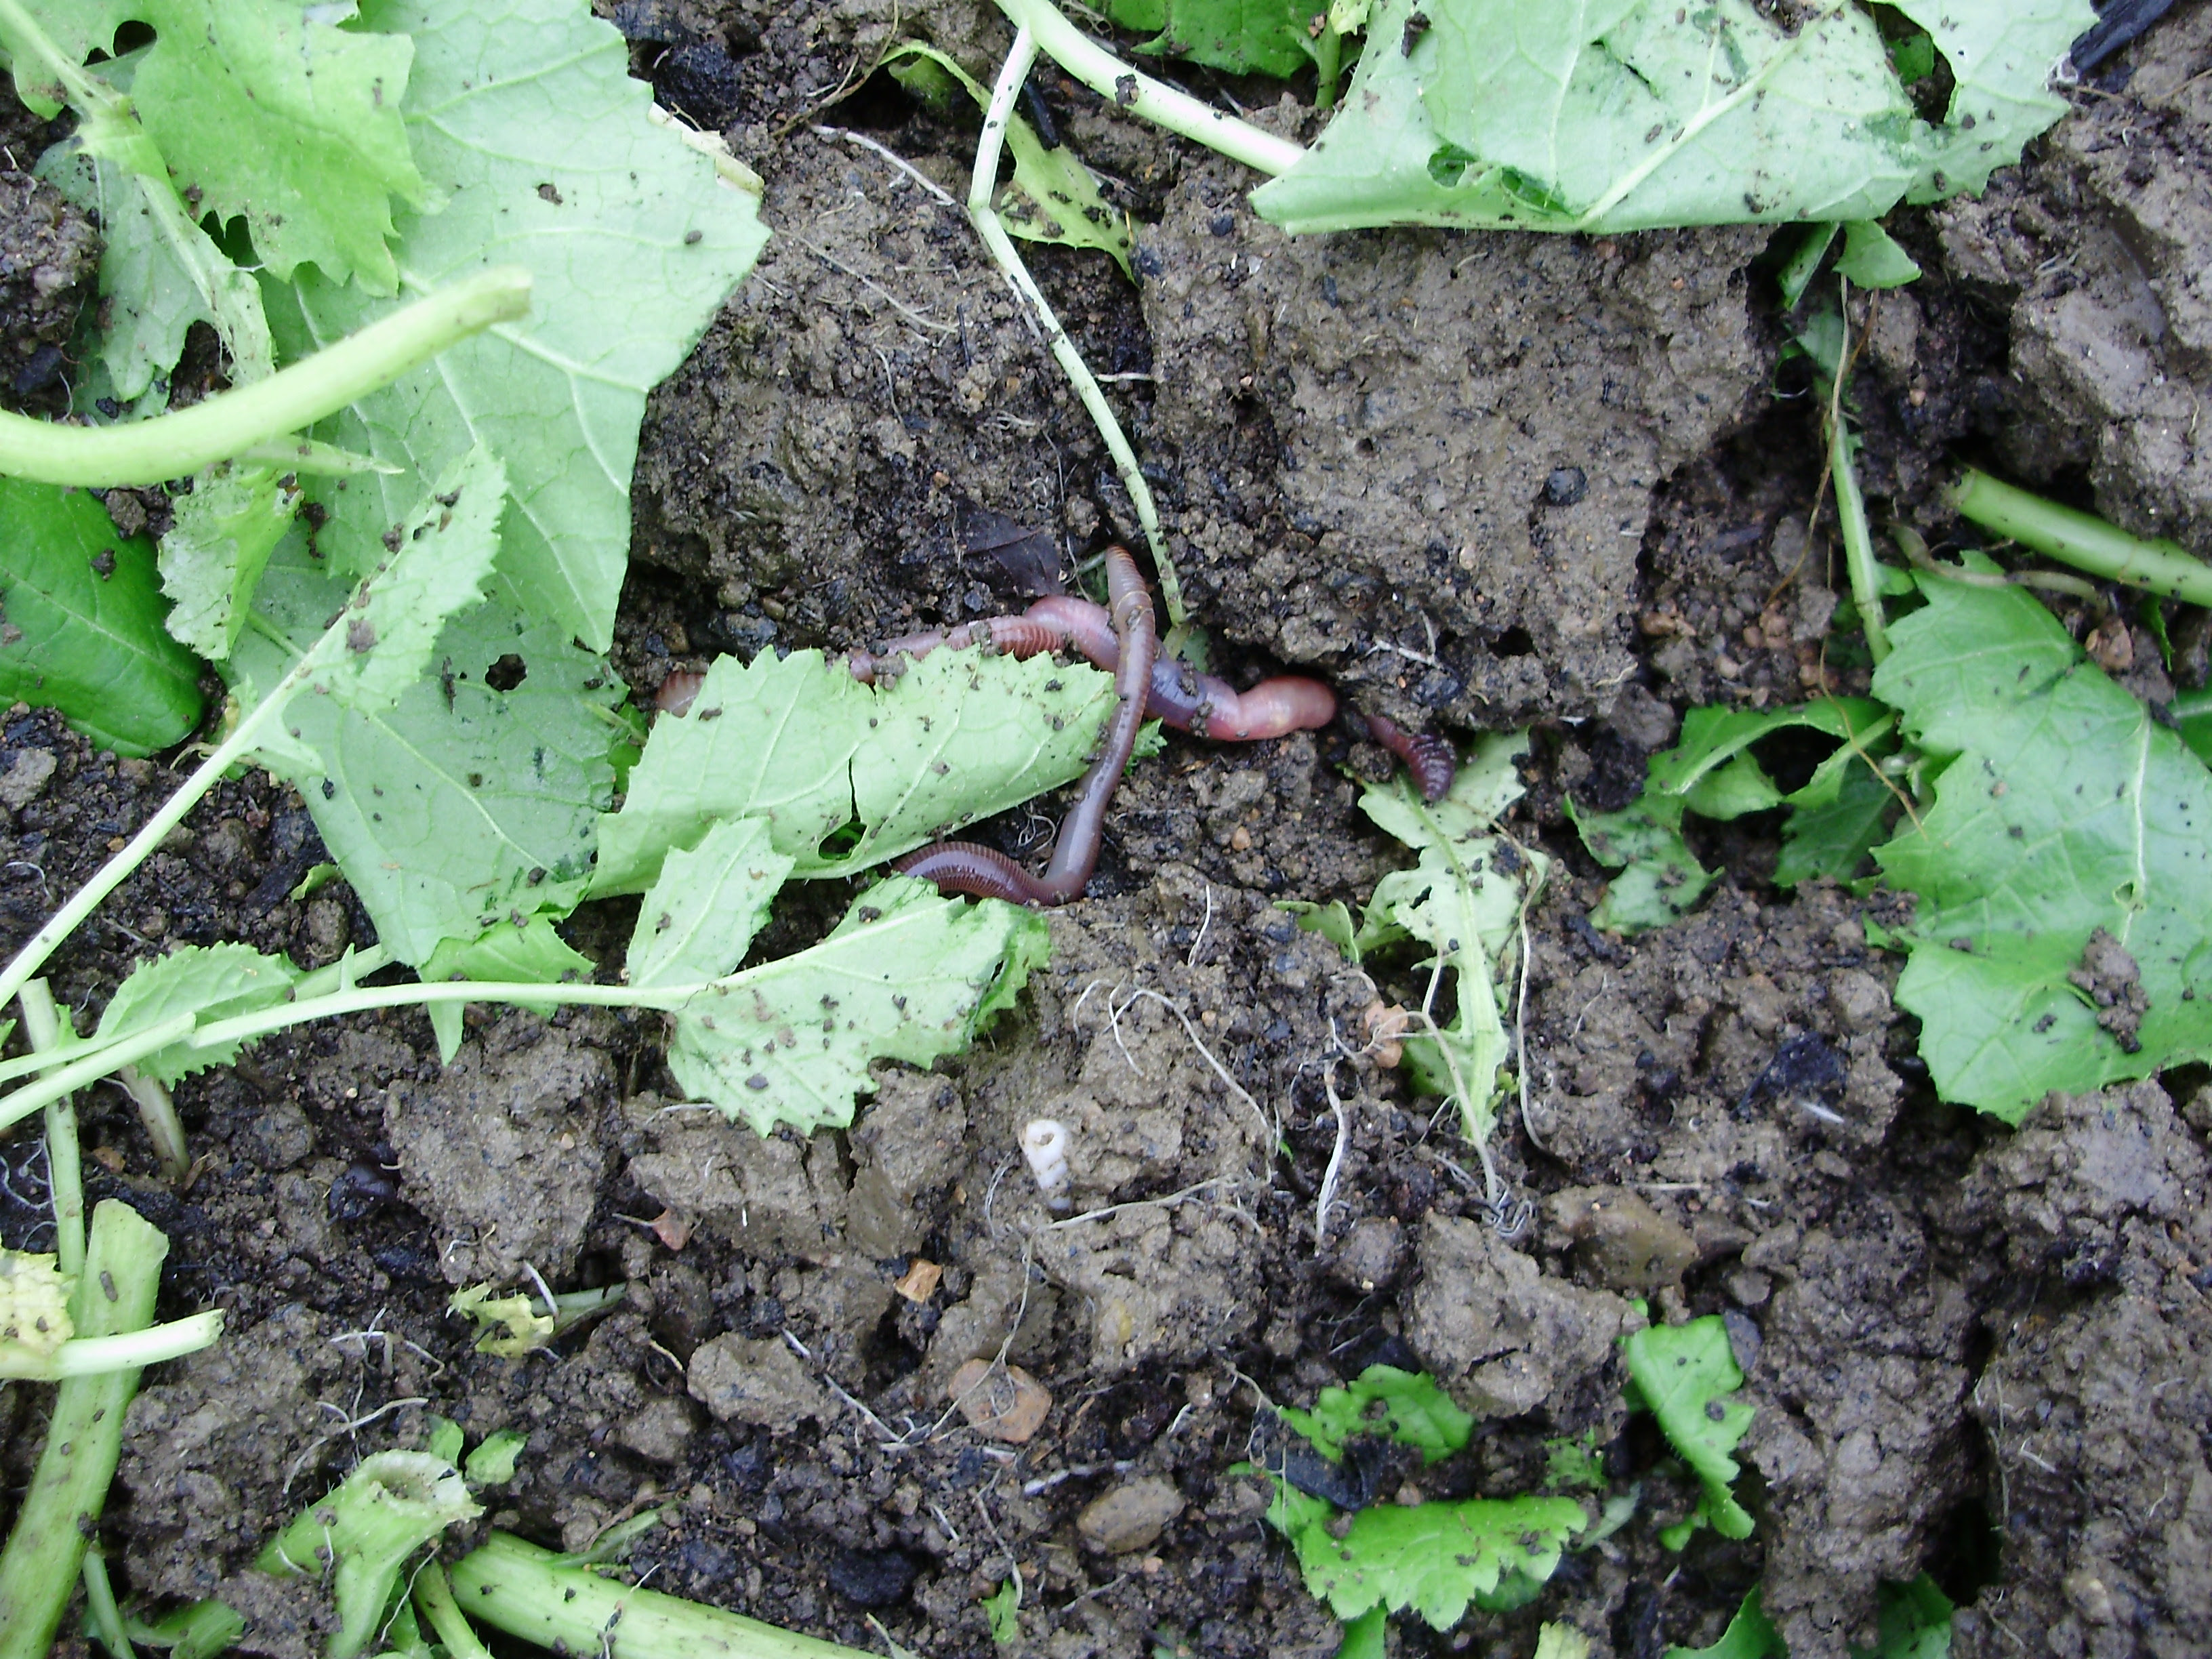 Worms already getting to work on the green manure mustard after cutting down & forking in.